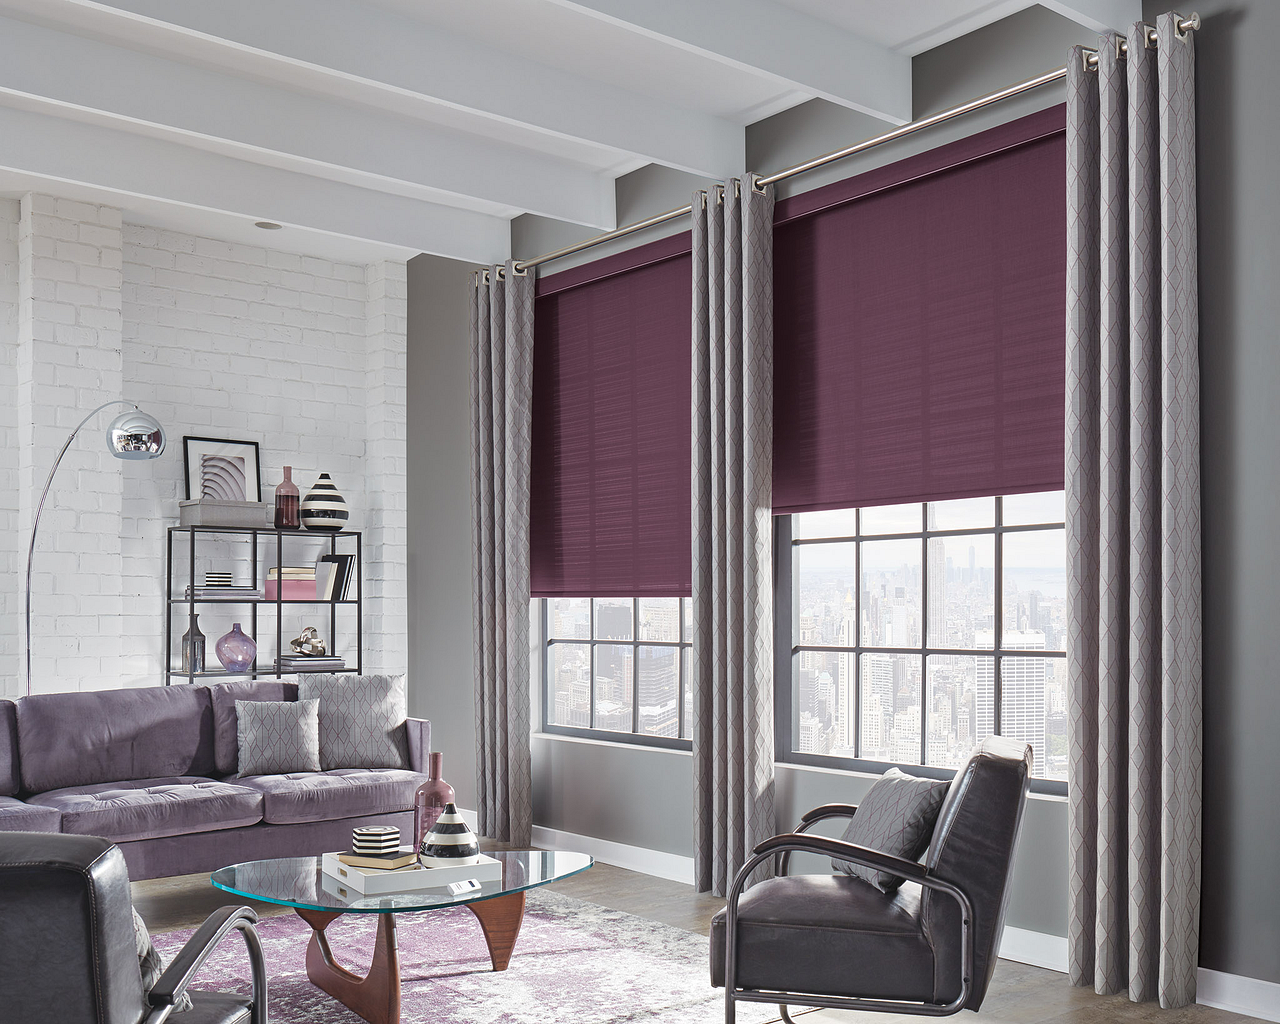 Refresh Your Home Interior With Window Coverings From Lenexa KS Curtain Supplier